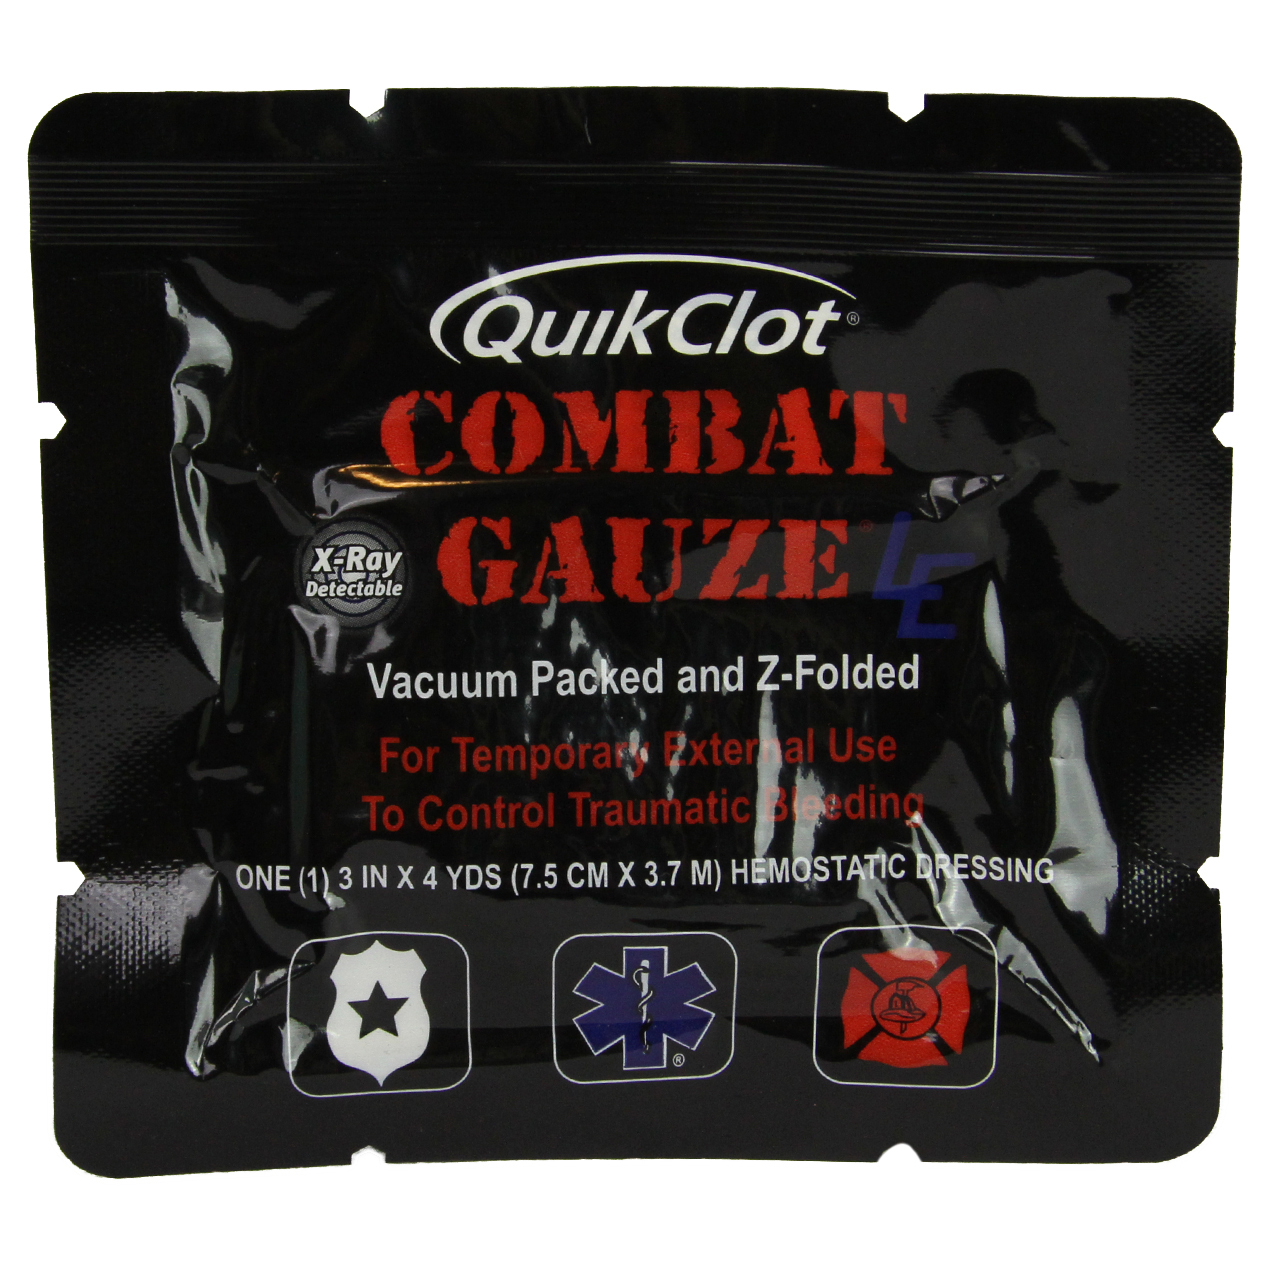 Quikclot Combat Gauze packaging with single bandage out of package